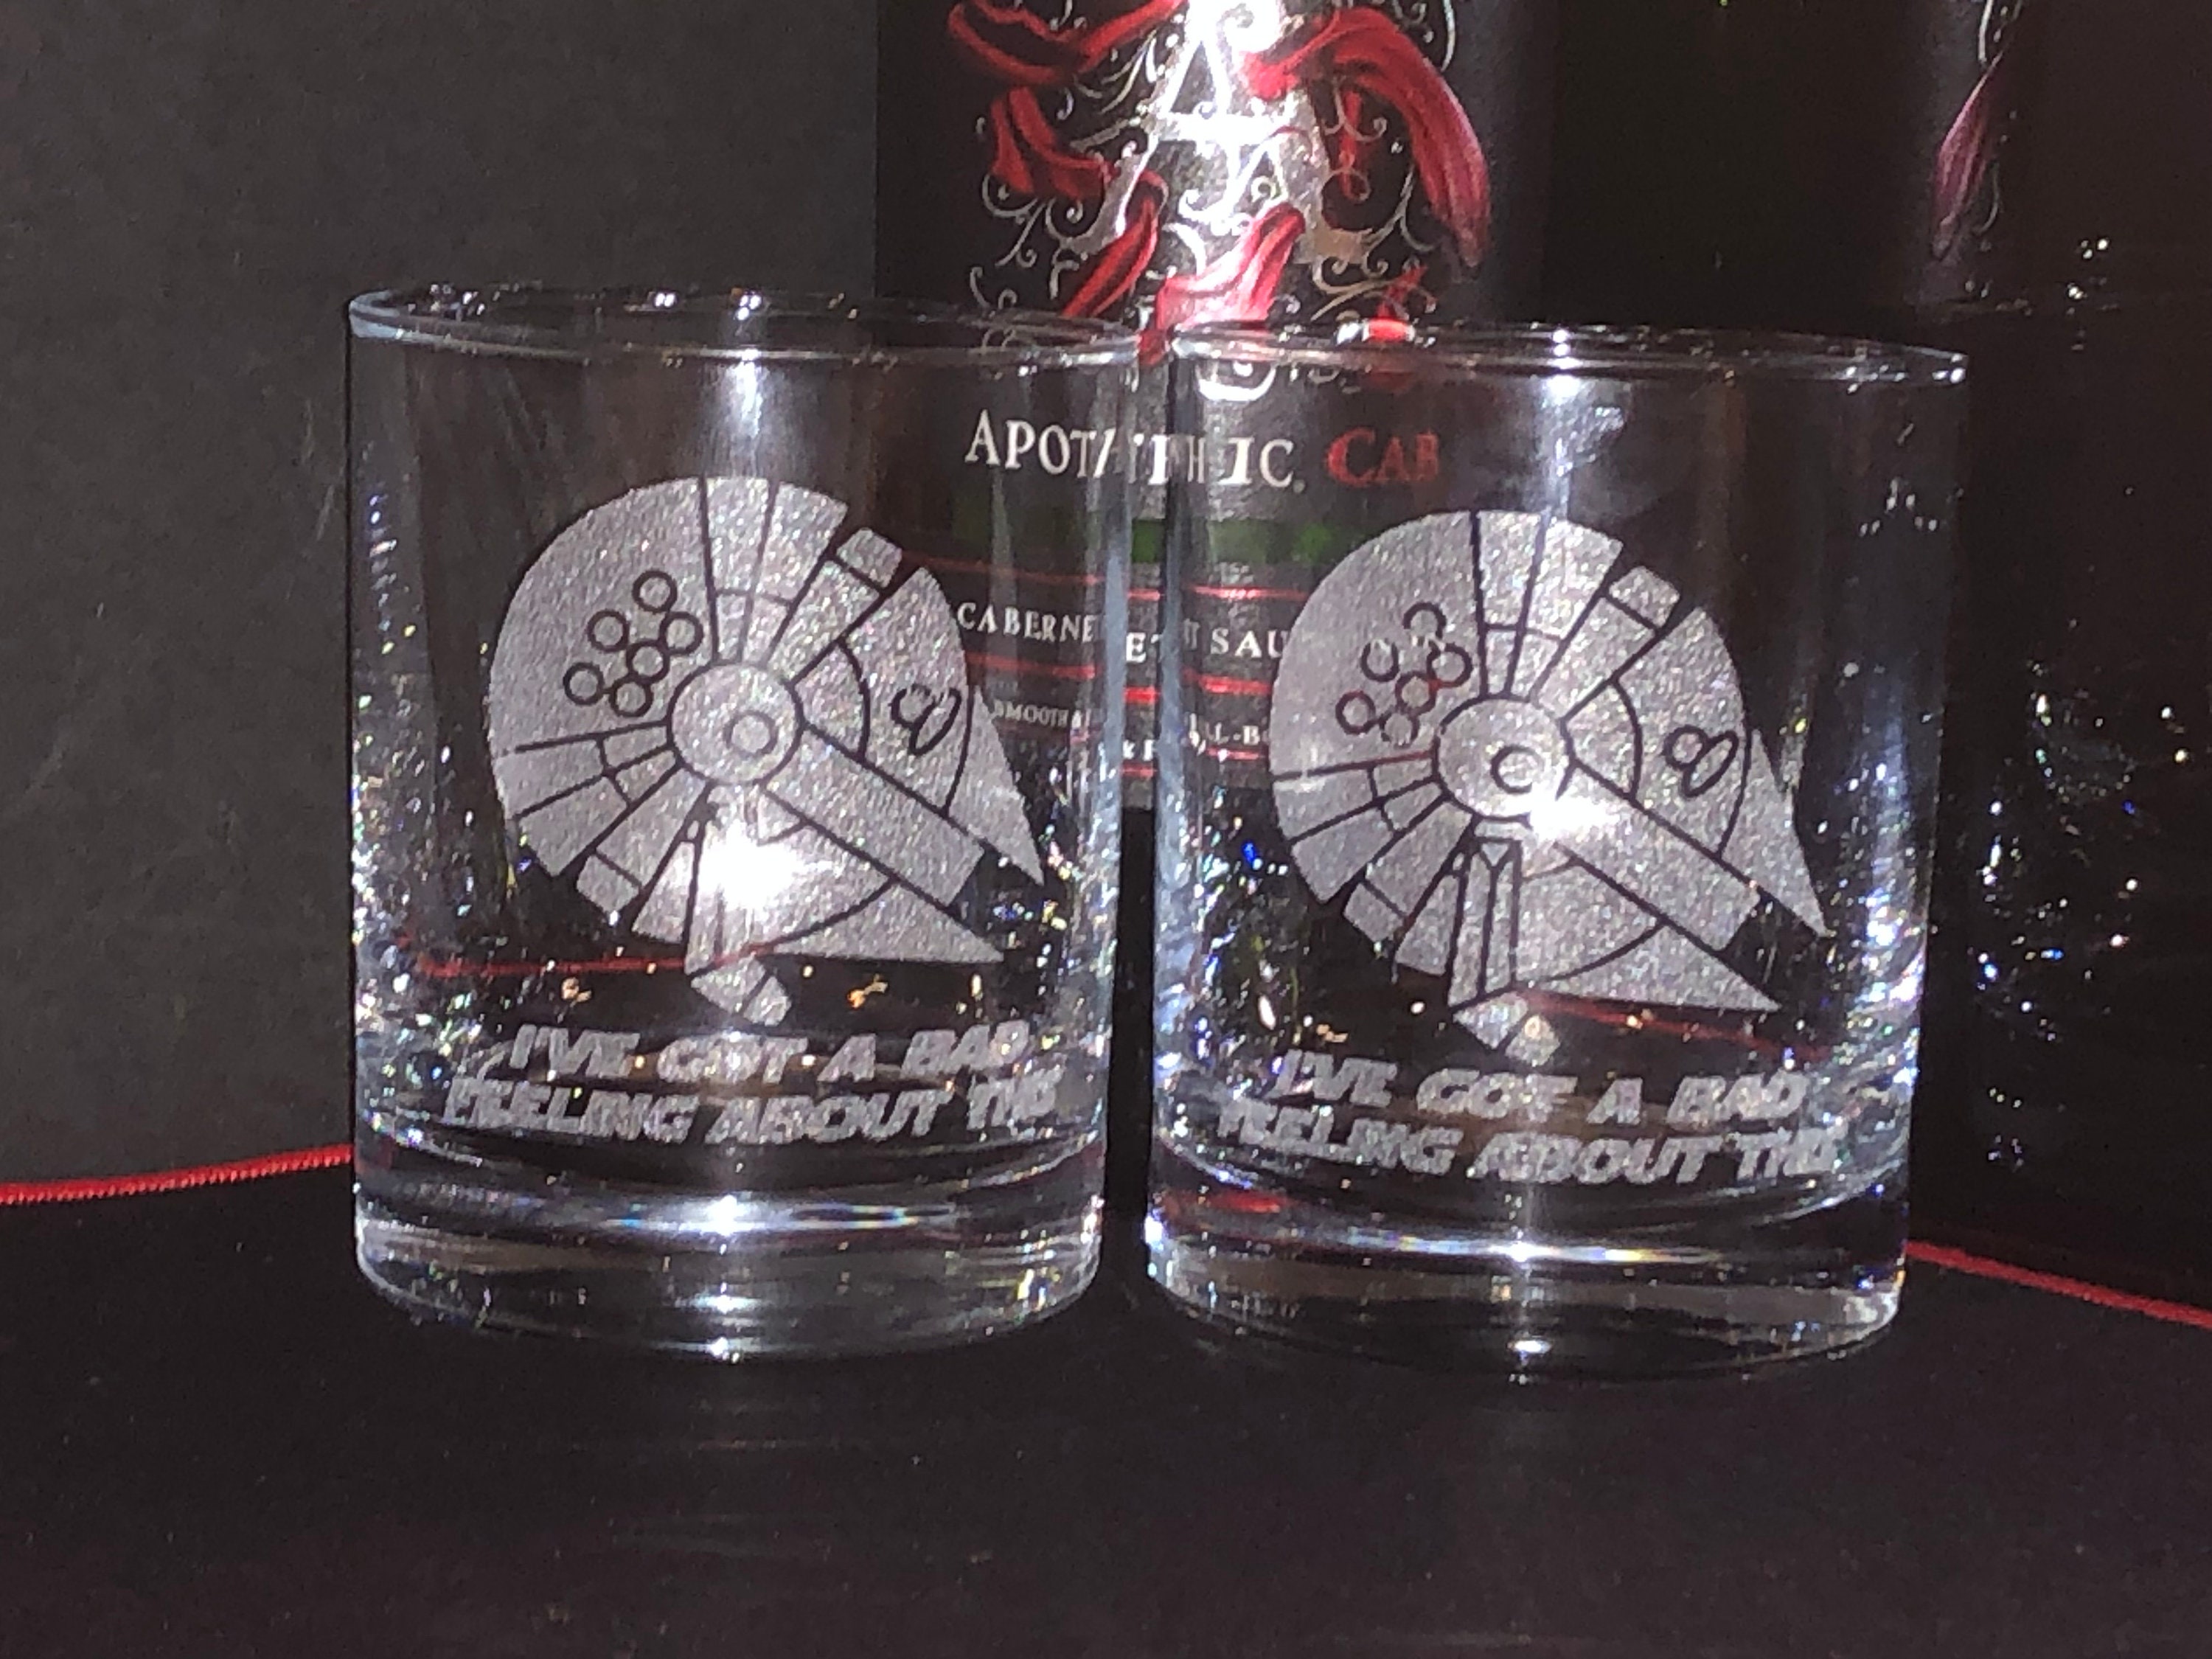 Star Wars Glasses, Millennium Falcon Rocks Glasses, Bad Feeling About This,  Star Wars Gifts, Rocks Glasses, Whiskey Glasses, Bourbon Glasses